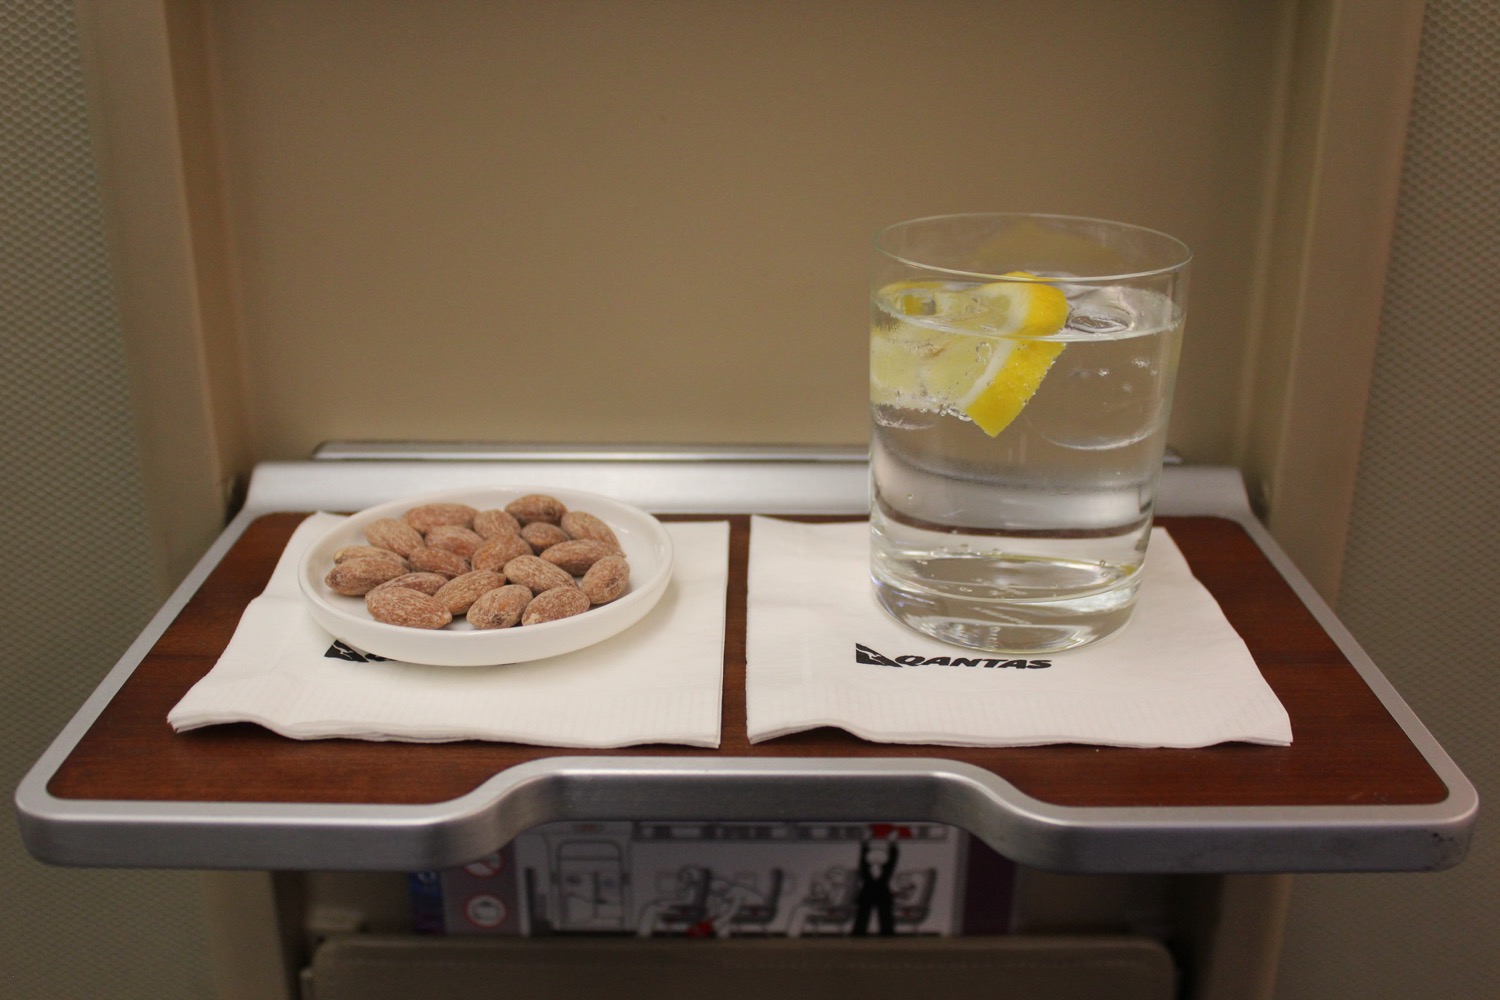 a plate of food and a glass of water on a tray